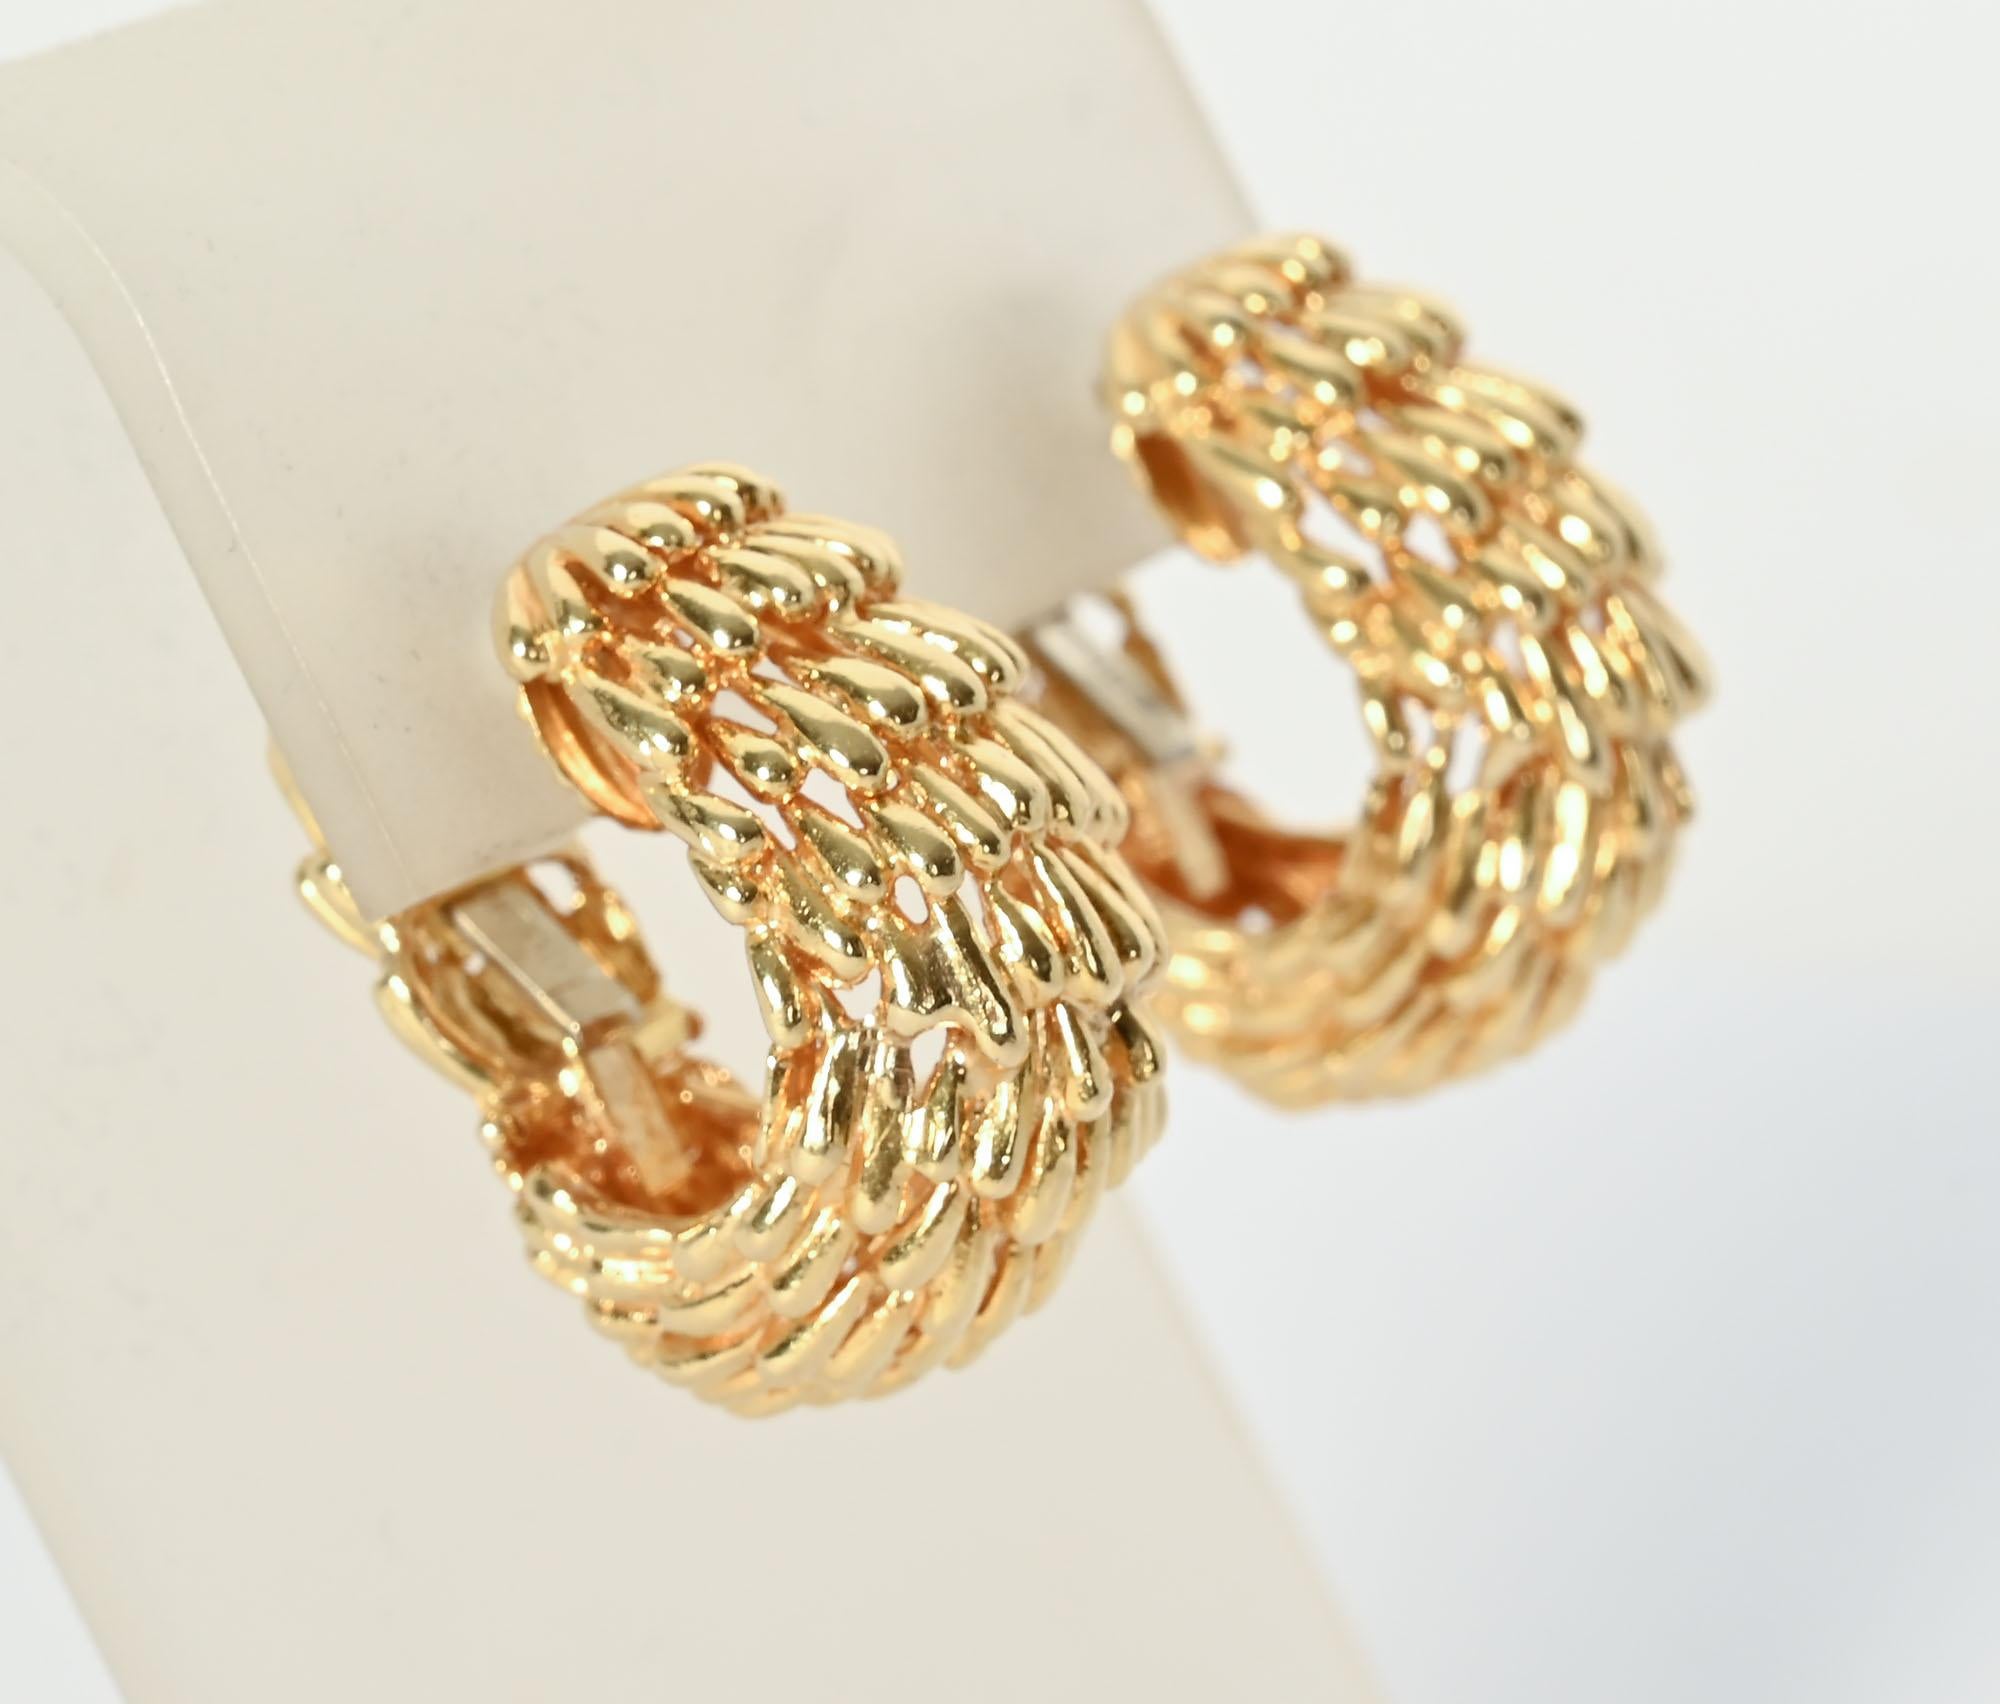 David Webb oval hoop earrings made of small strokes of gold. They look as though they were made with a tiny paintbrush.
No effort was spared as the design continues throughout the back. The earrings are cleverly made with an invisible hinge in the